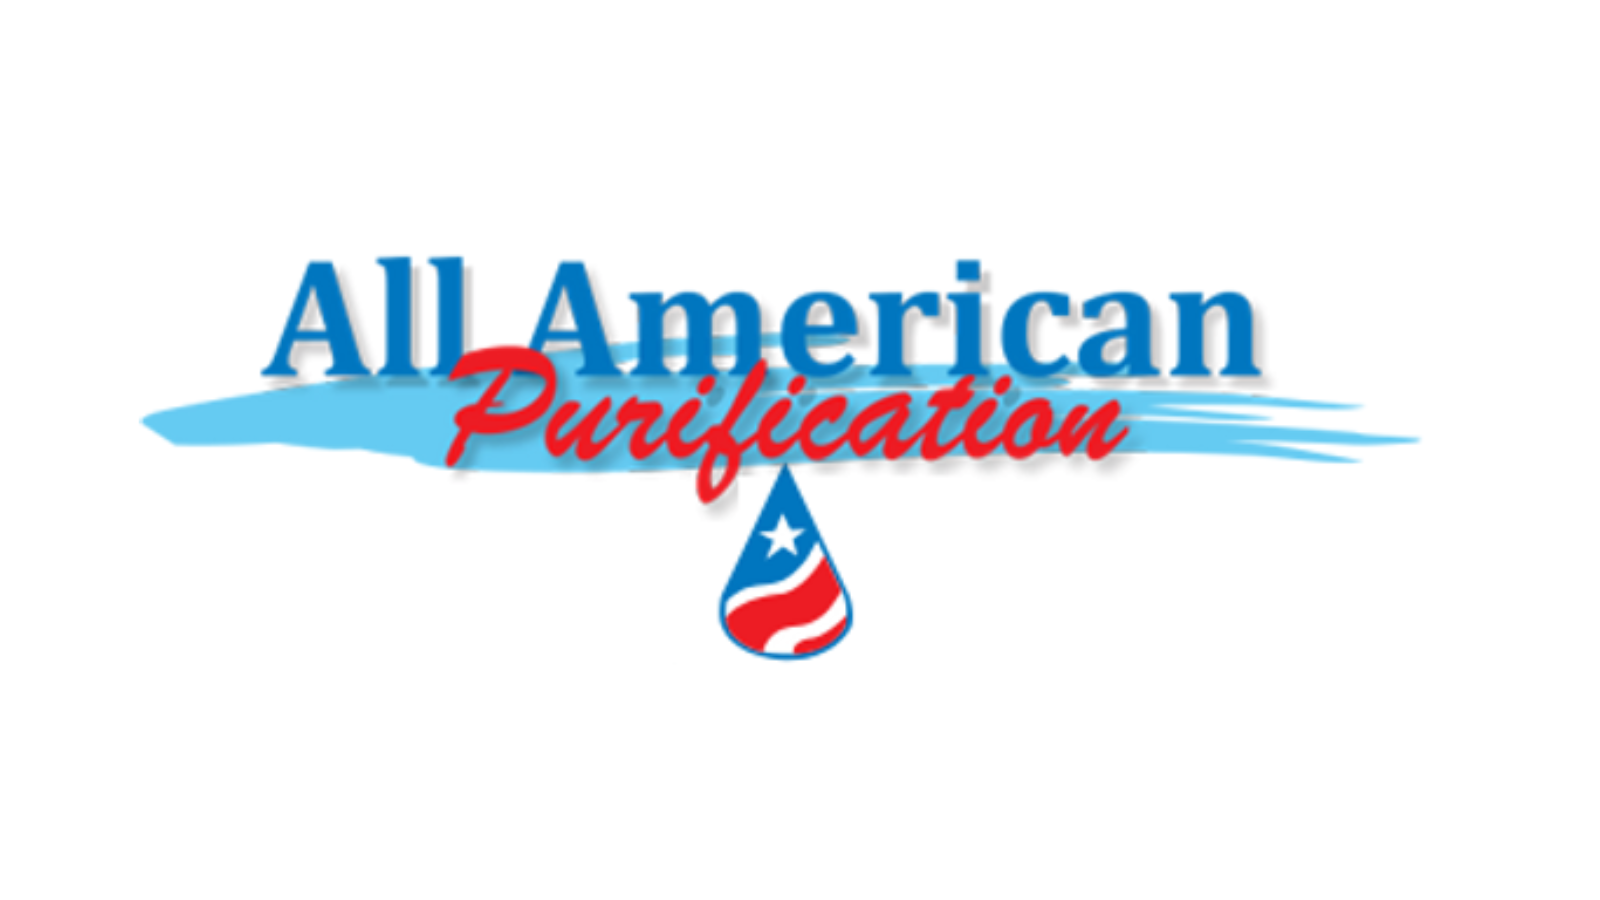 All American Purification